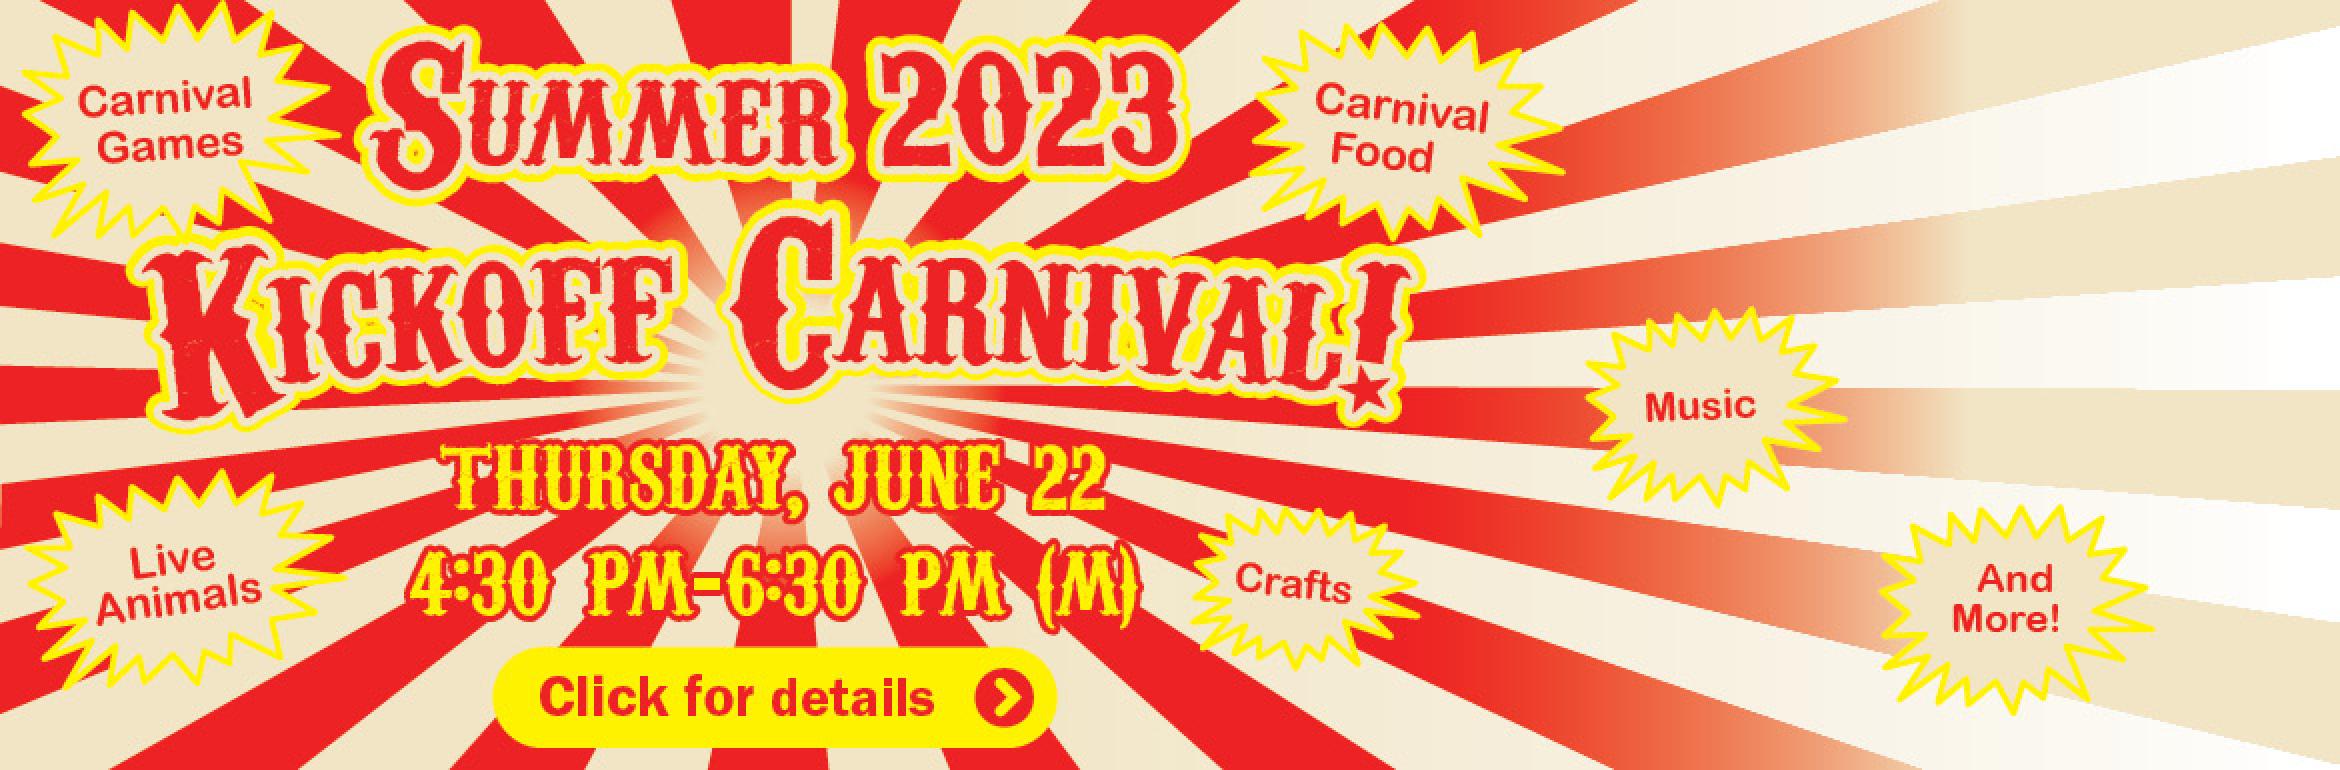 Summer 2023 Kickoff Carnival! Thursday, june 22, 4:30 PM–6:30 PM (M). Carnival Games. Carnival Food. Live Animals. Crafts. Music. And More! Click for details.